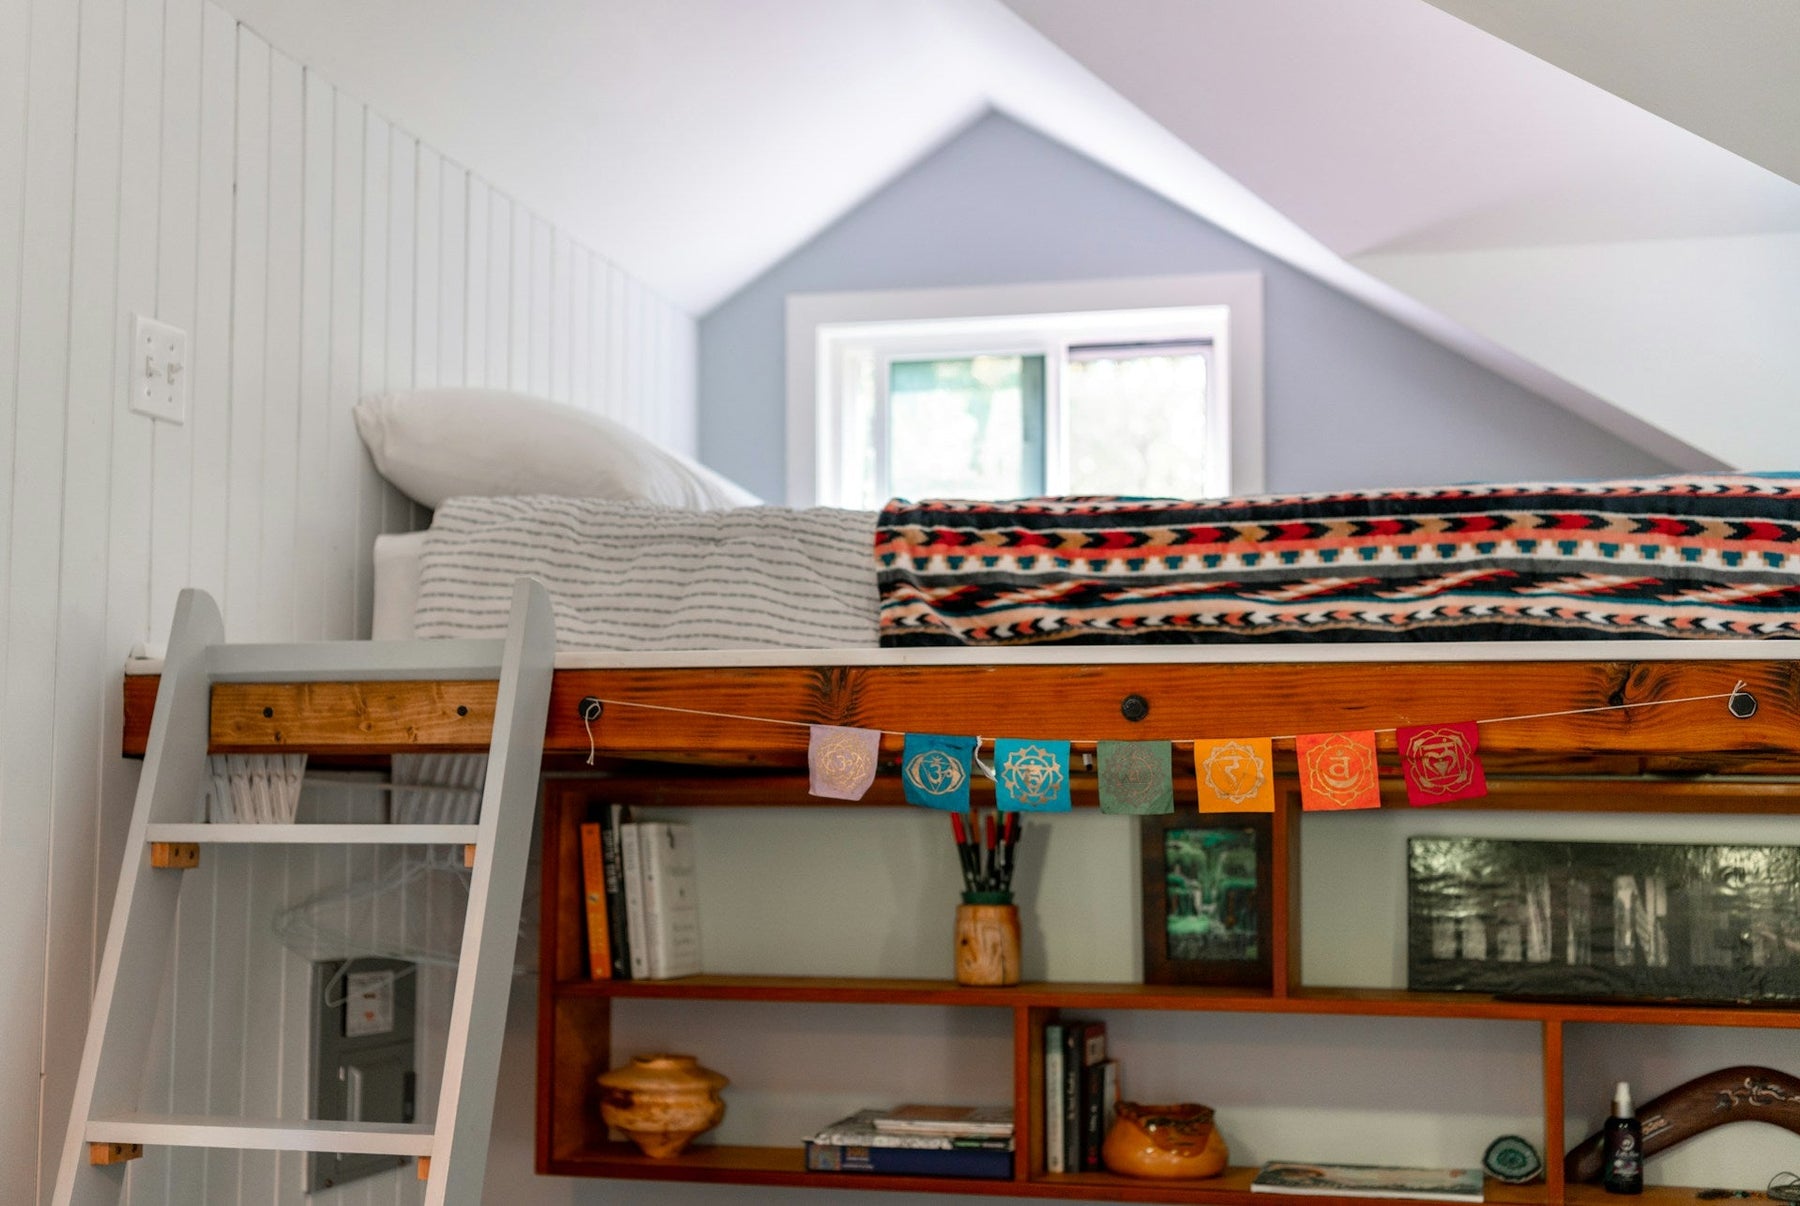 Child Bunk Beds: Choosing the Right Option for Your Little Ones - Rest Relax